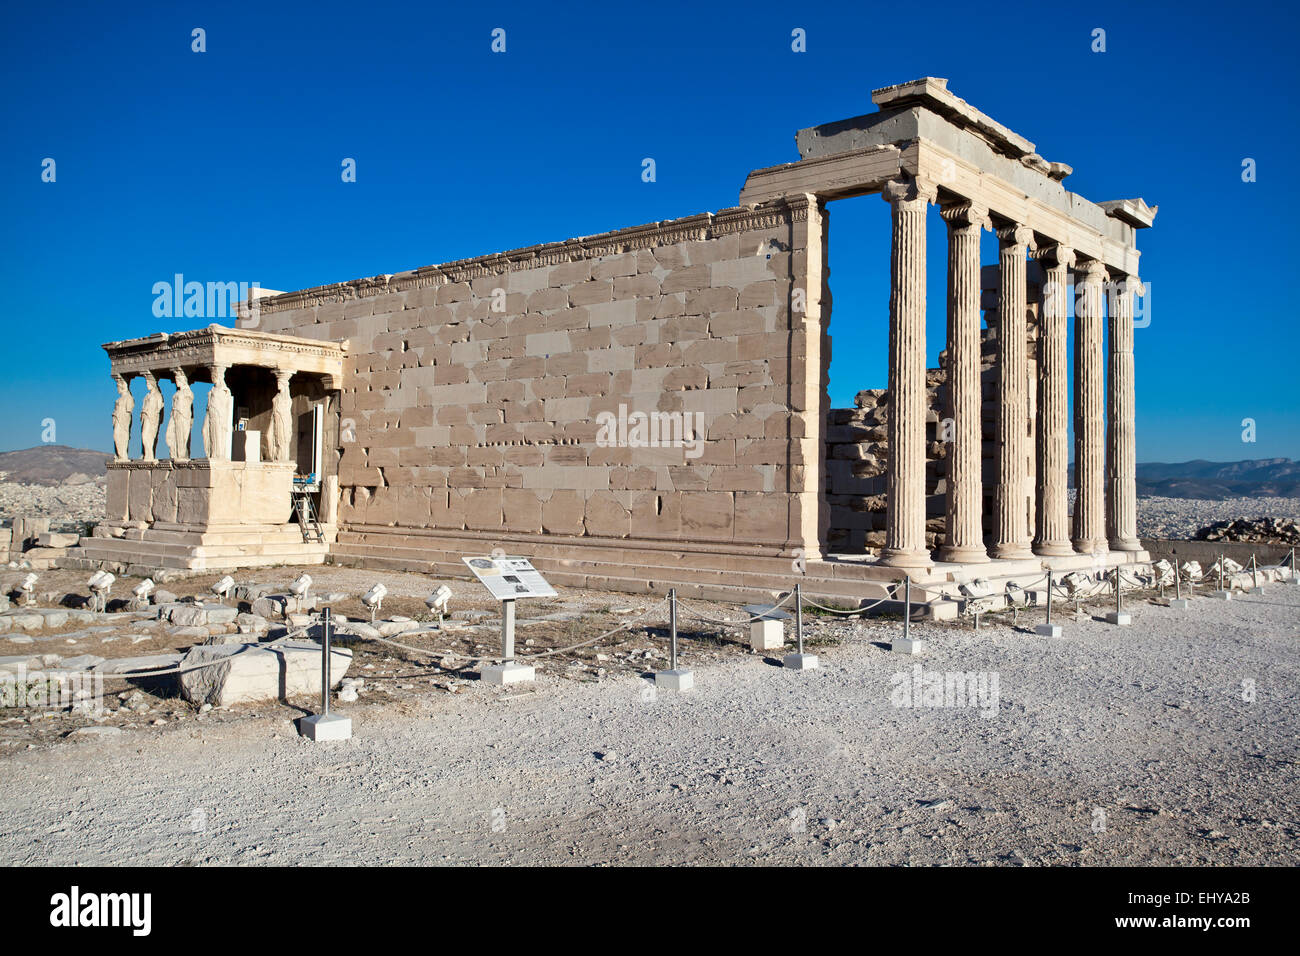 The Erechtheion ancient Greek temple on the north side of the Acropolis of Athens in Greece. Stock Photo